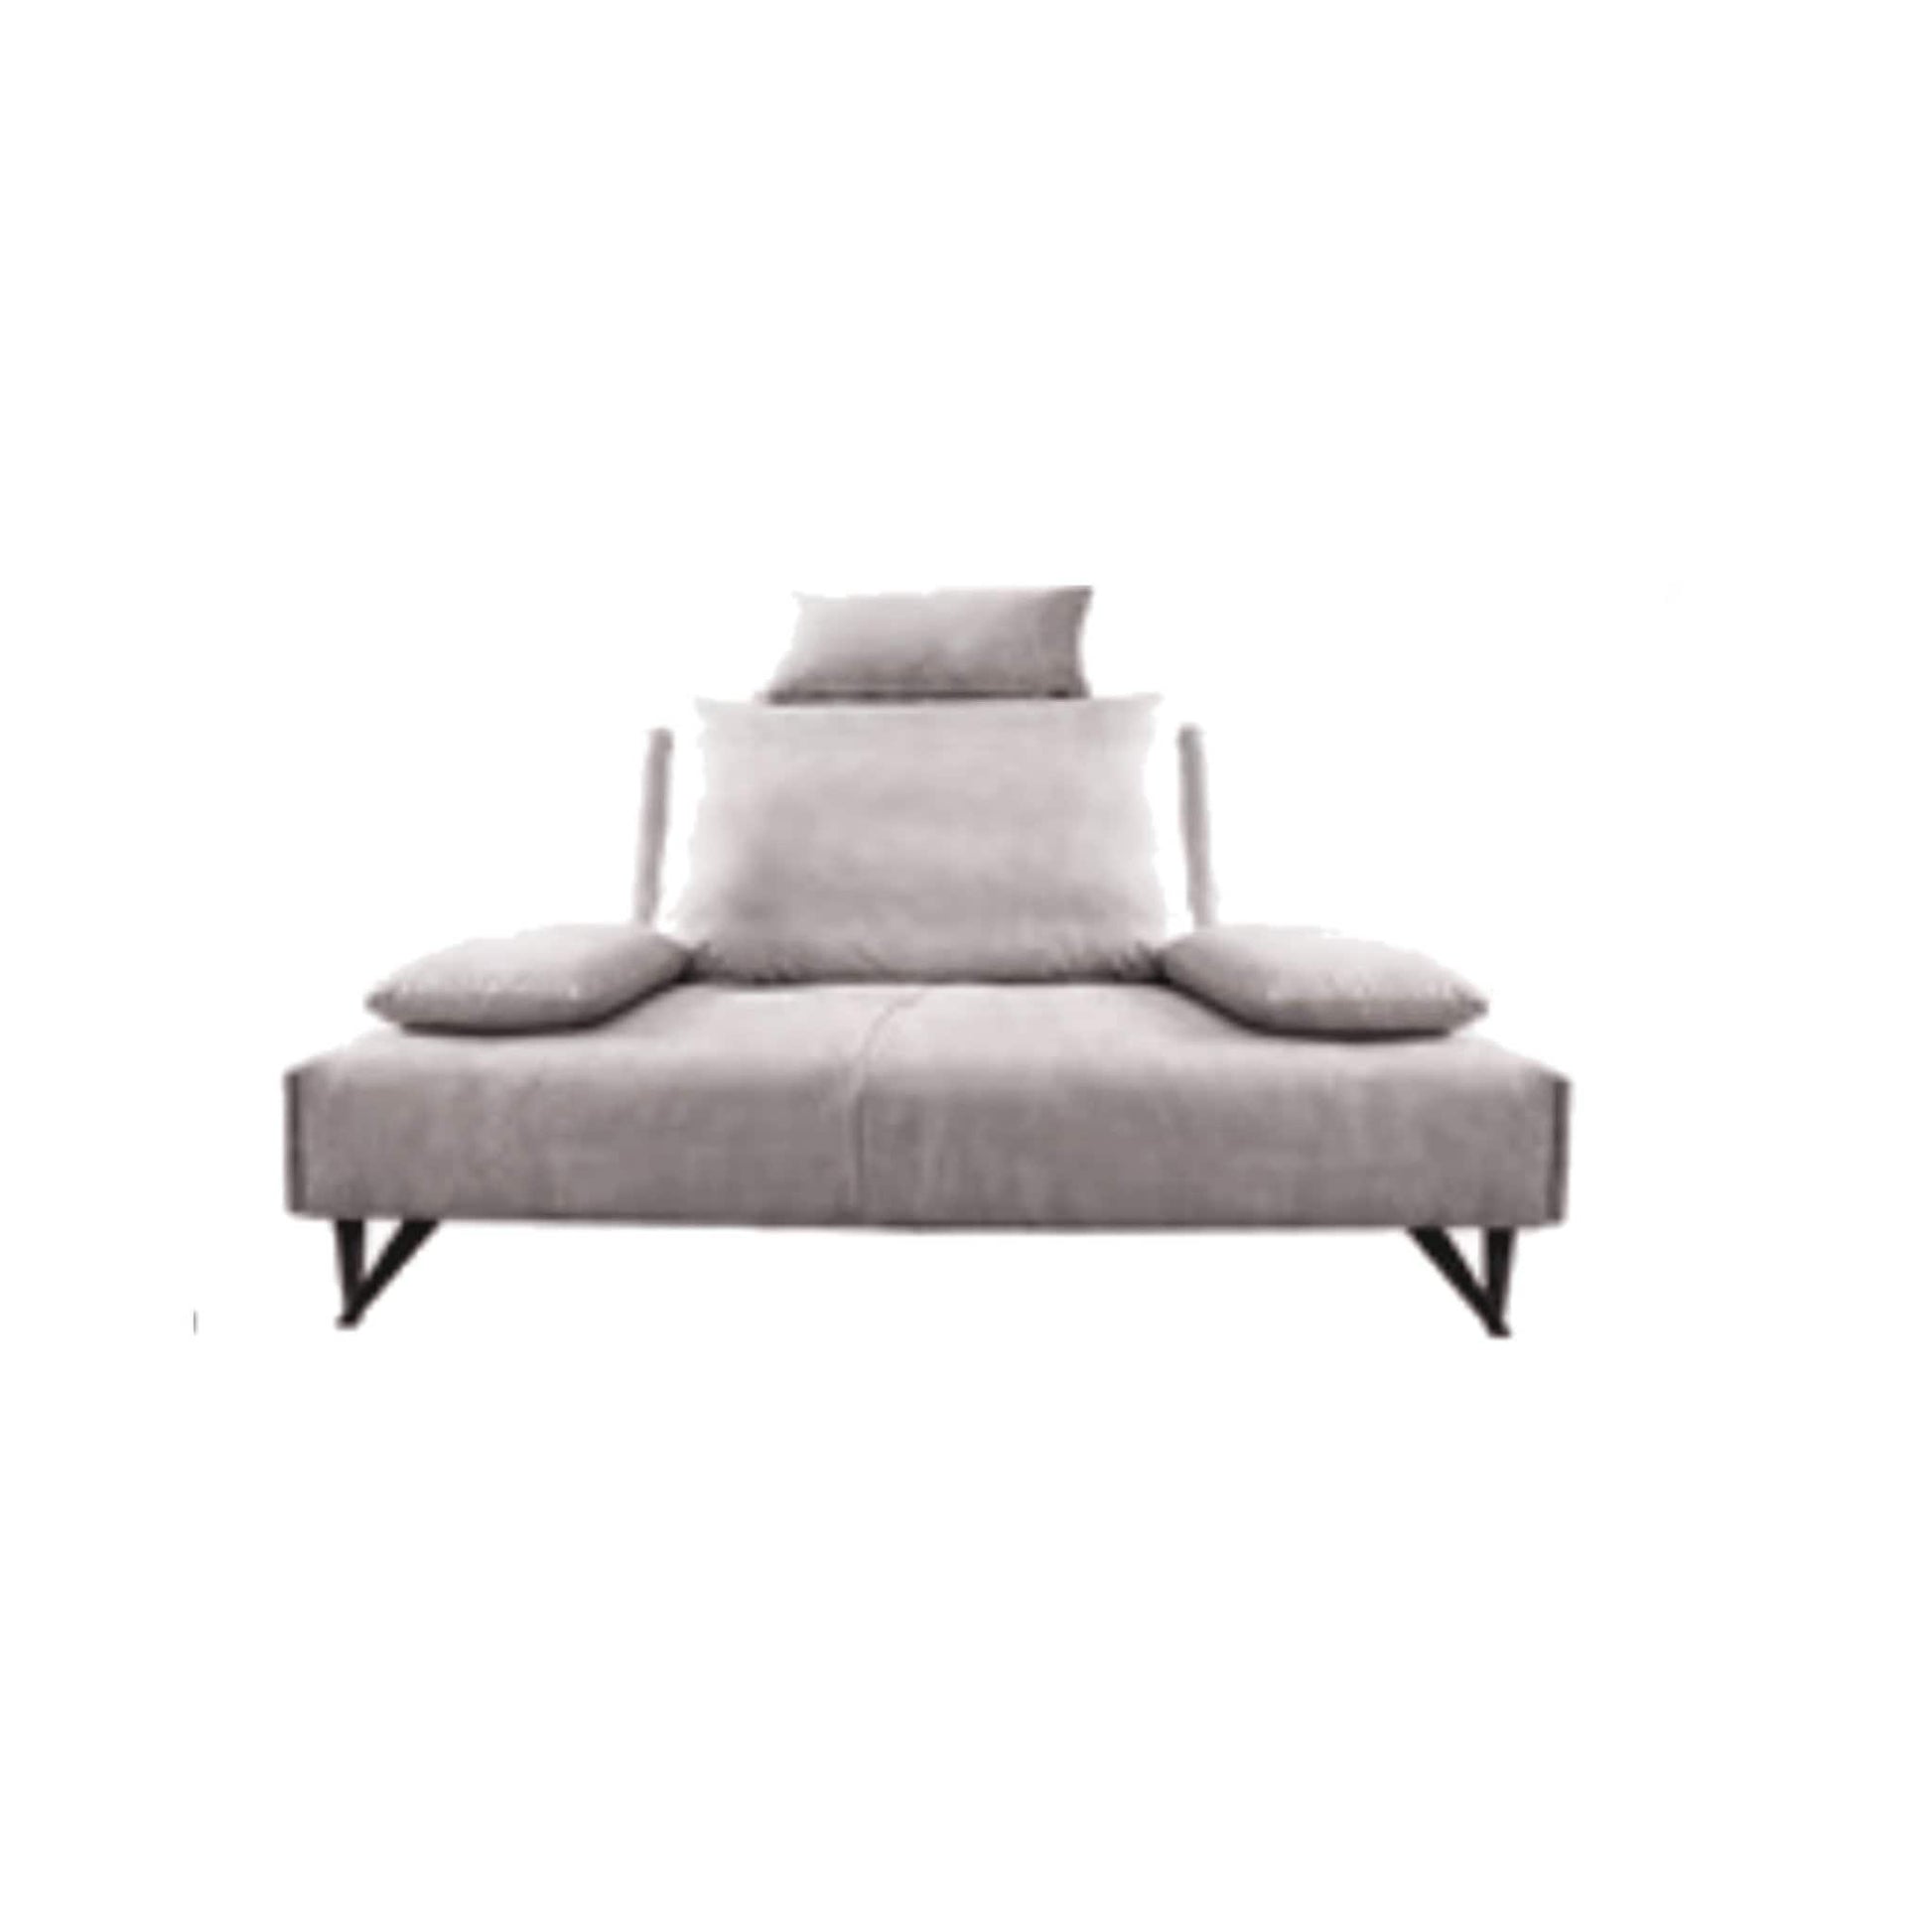 home-atelier-f31a Leather-Aire / 1 seater/ Length 140cm / Dark Grey Tallini Slider Sofa